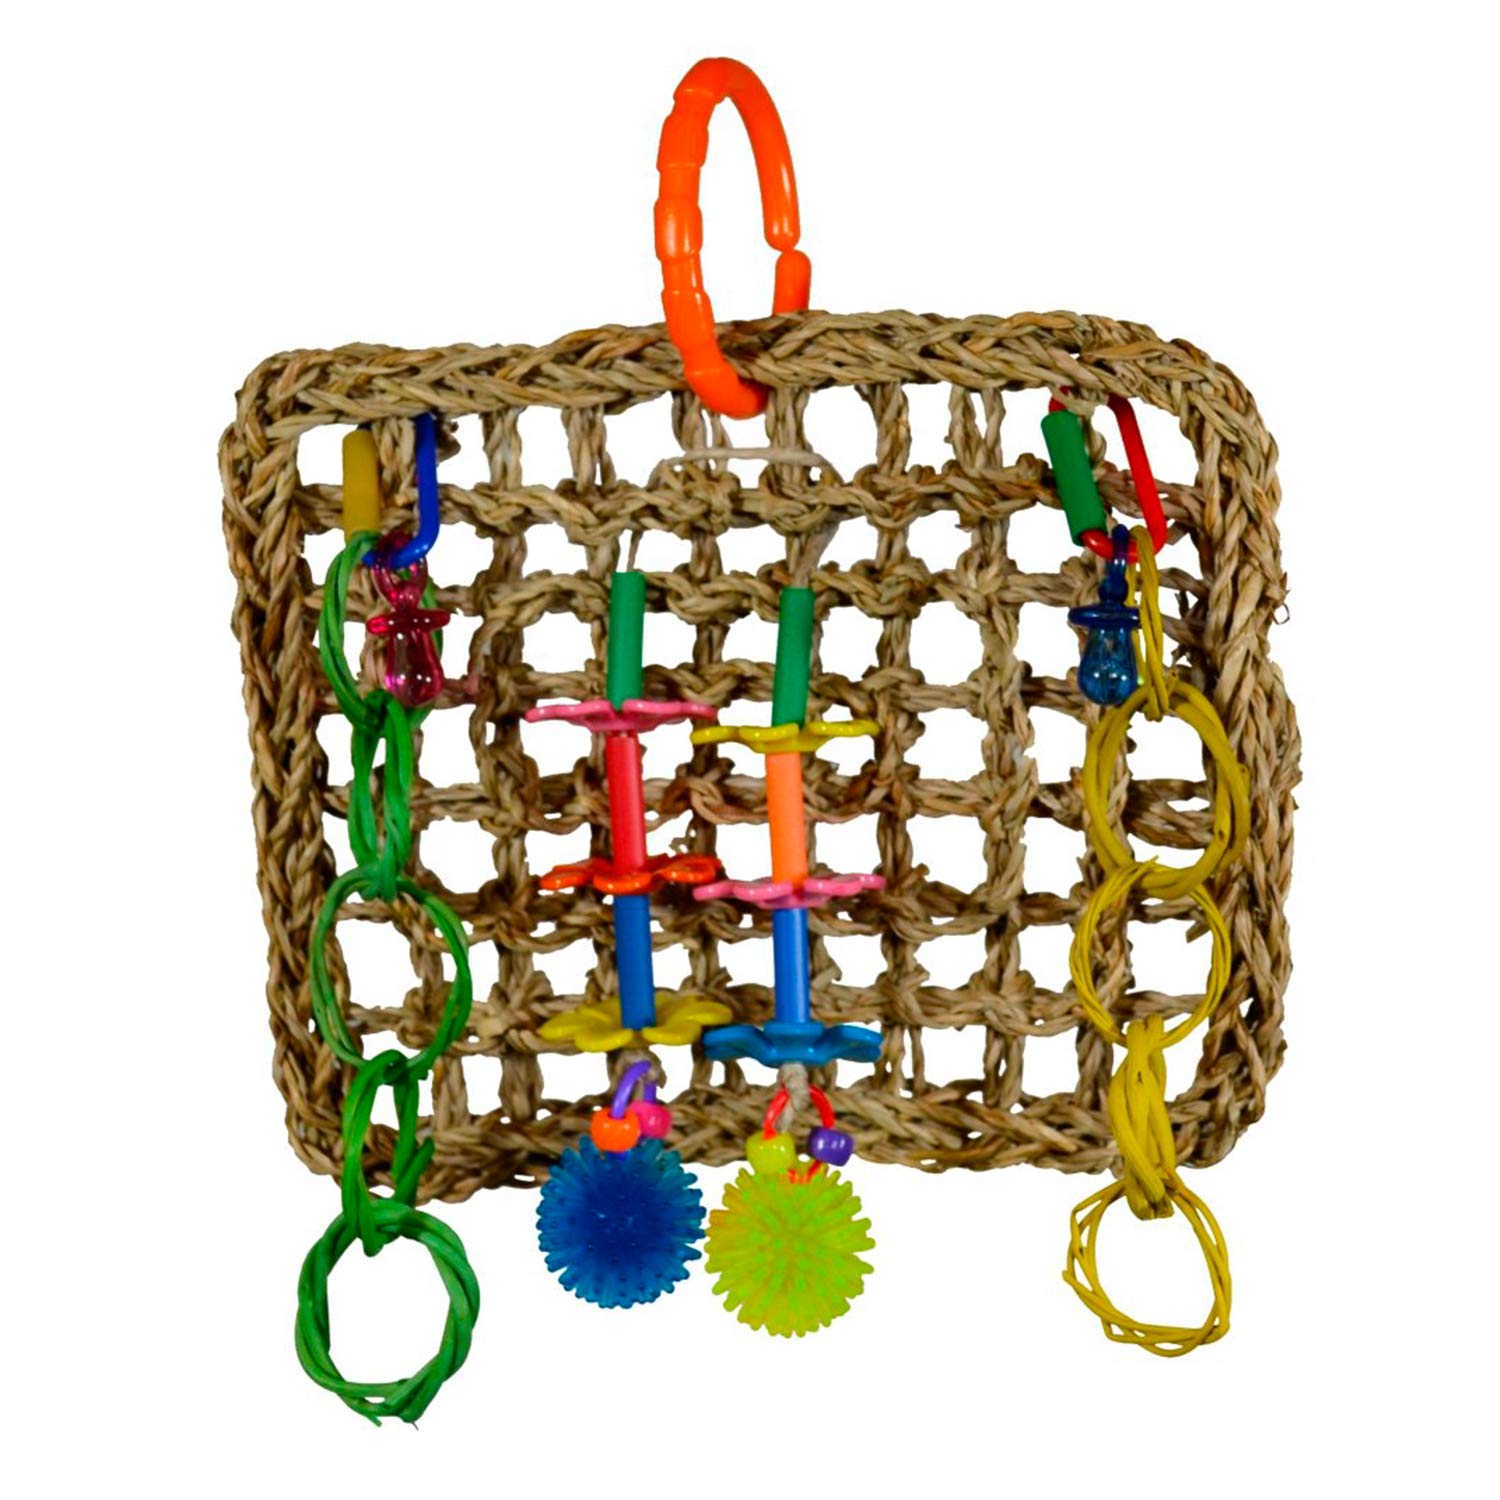 Super Bird Creations Seagrass Mini Activity Wall with Colorful Foraging Toys for Parrots, Medium Size, 9” x 7” x 2”